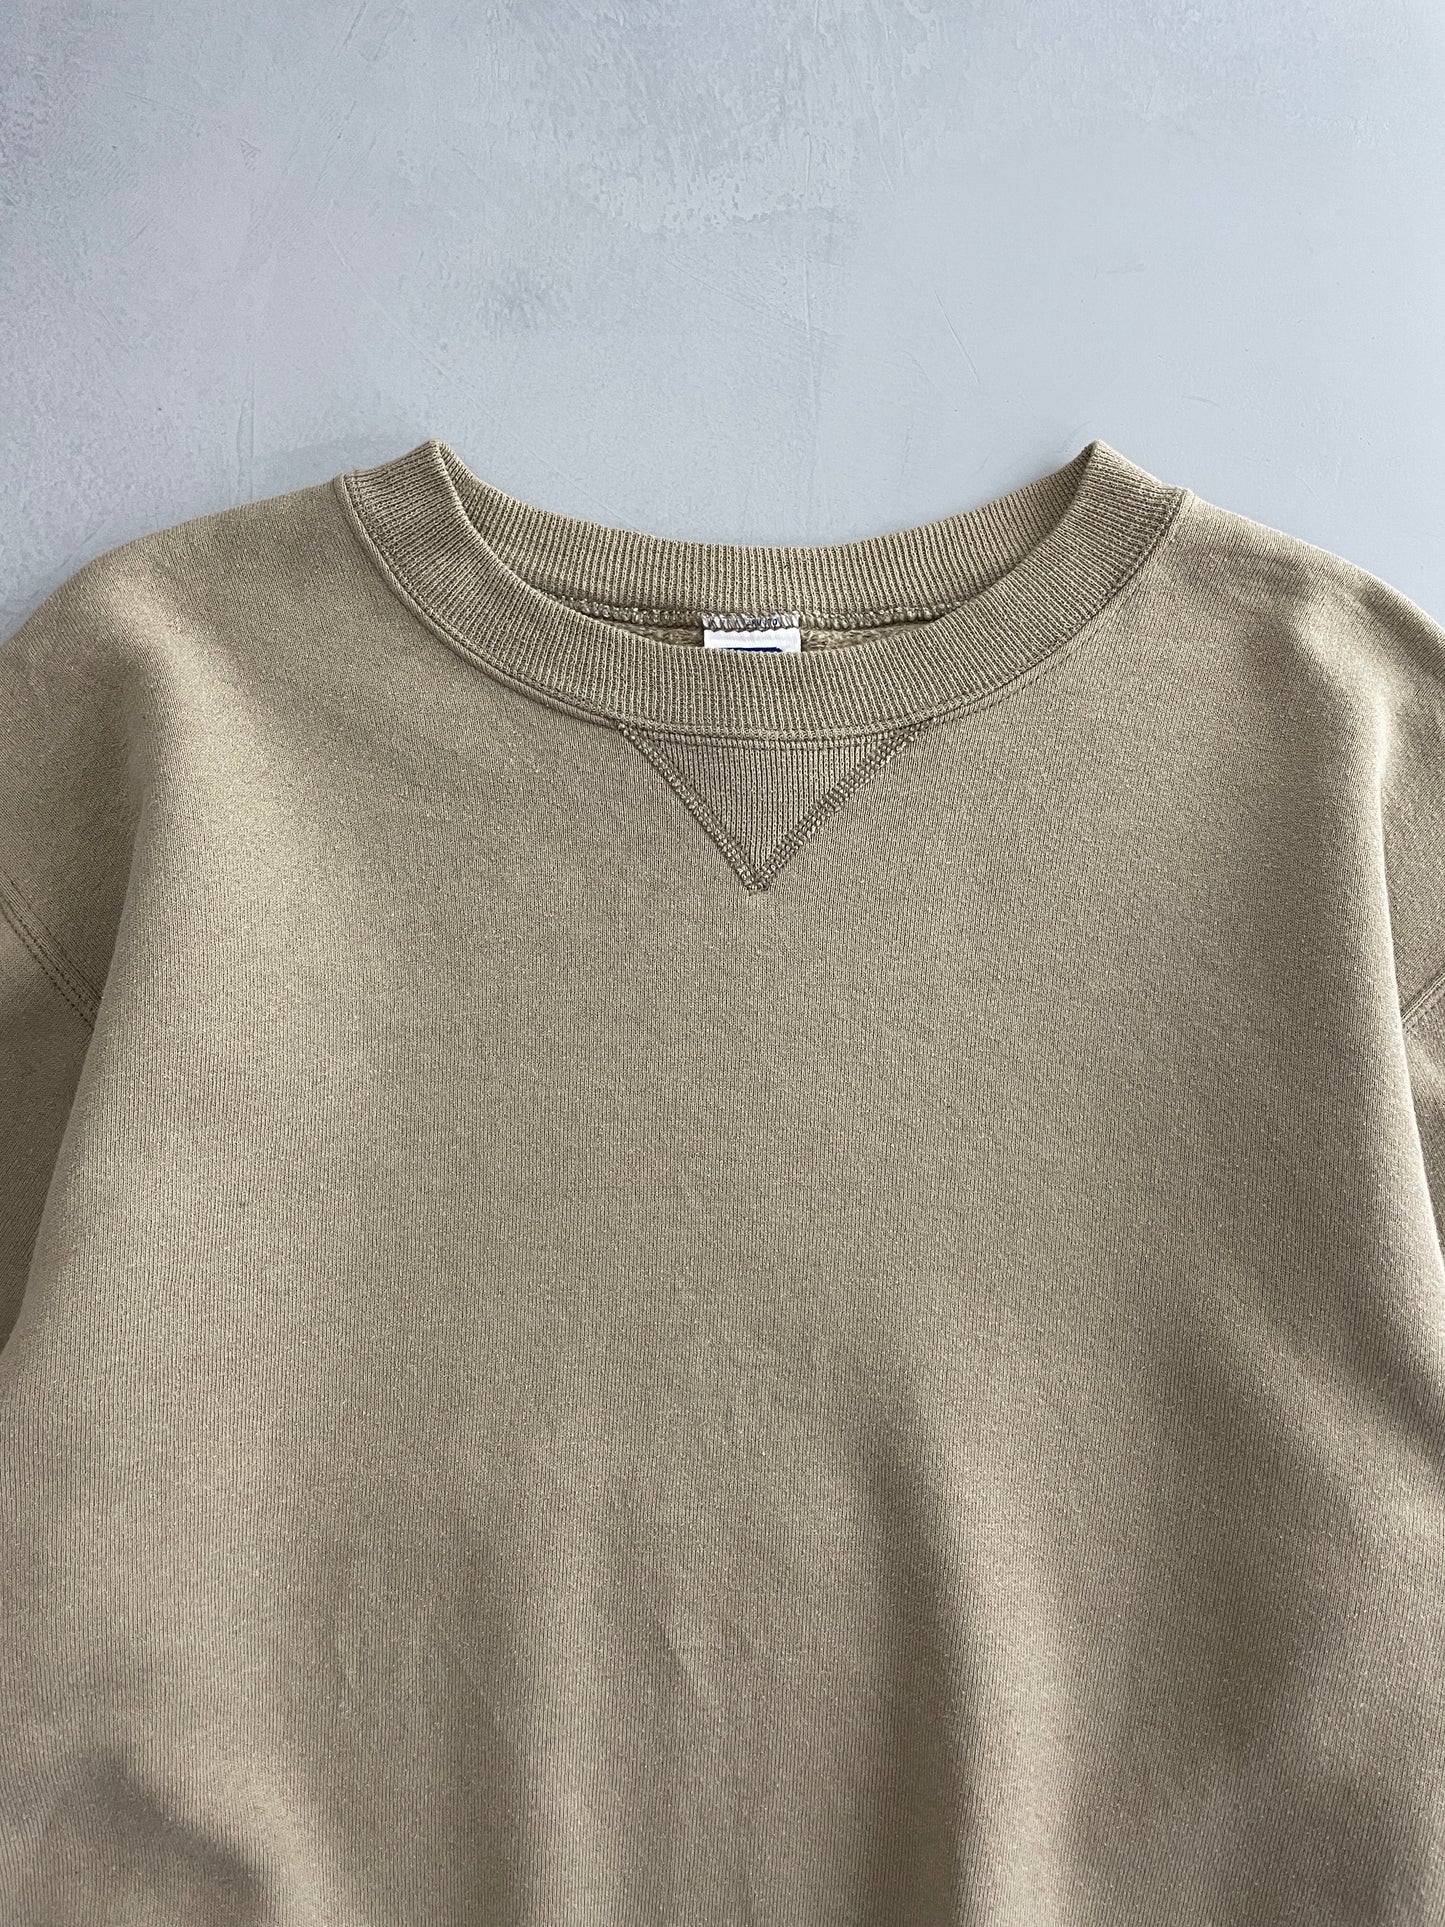 Faded Made In USA Blank Russell Sweatshirt [M]